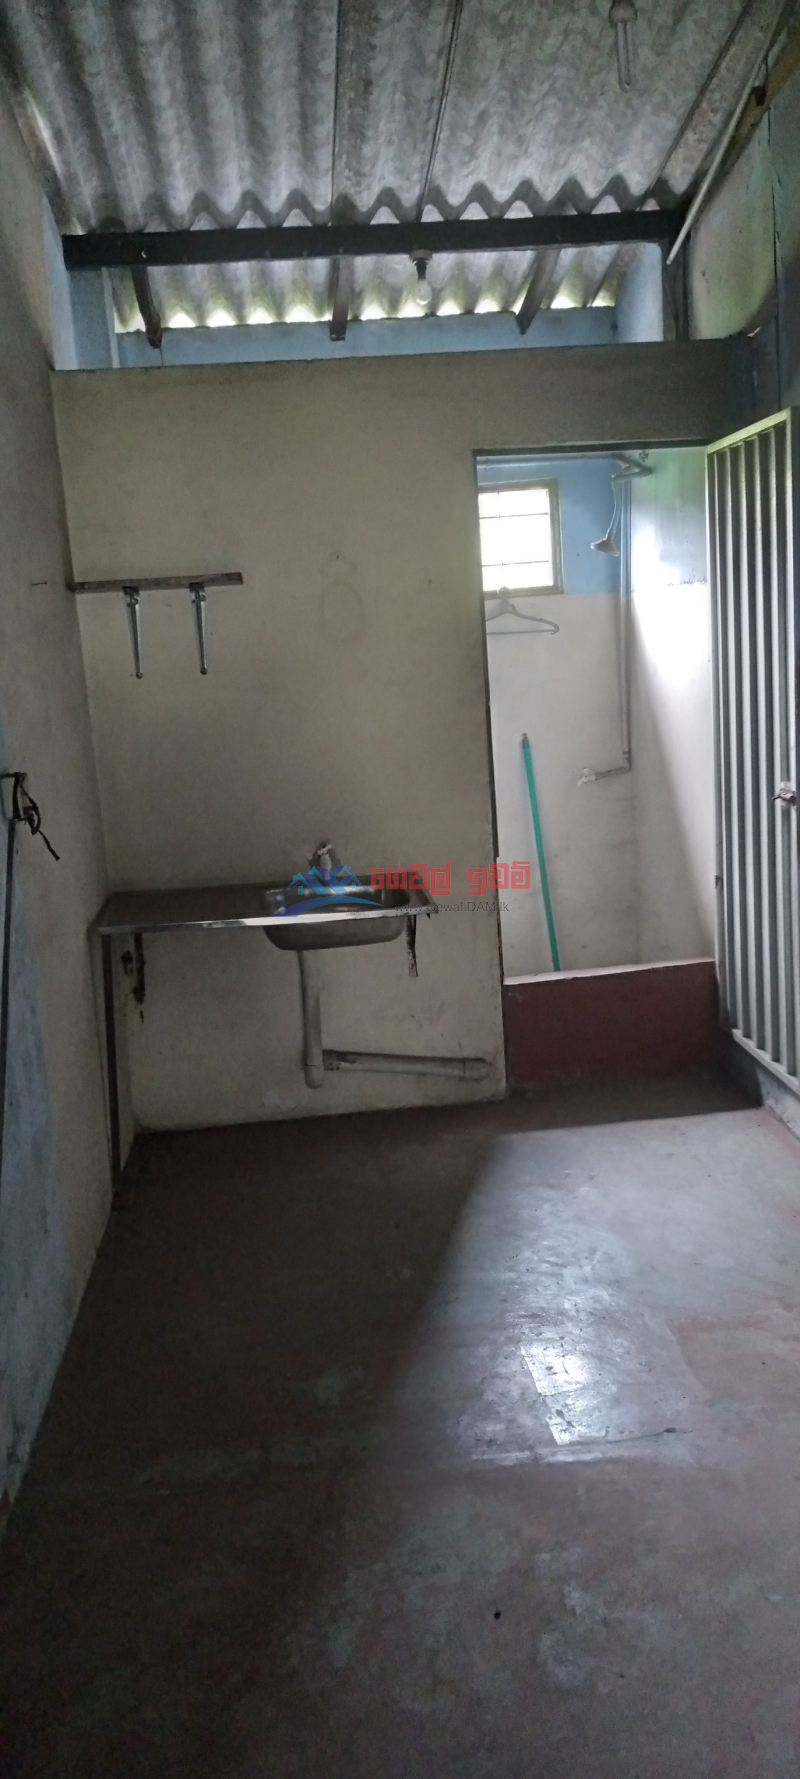 Commercial Property for sale in Kandy